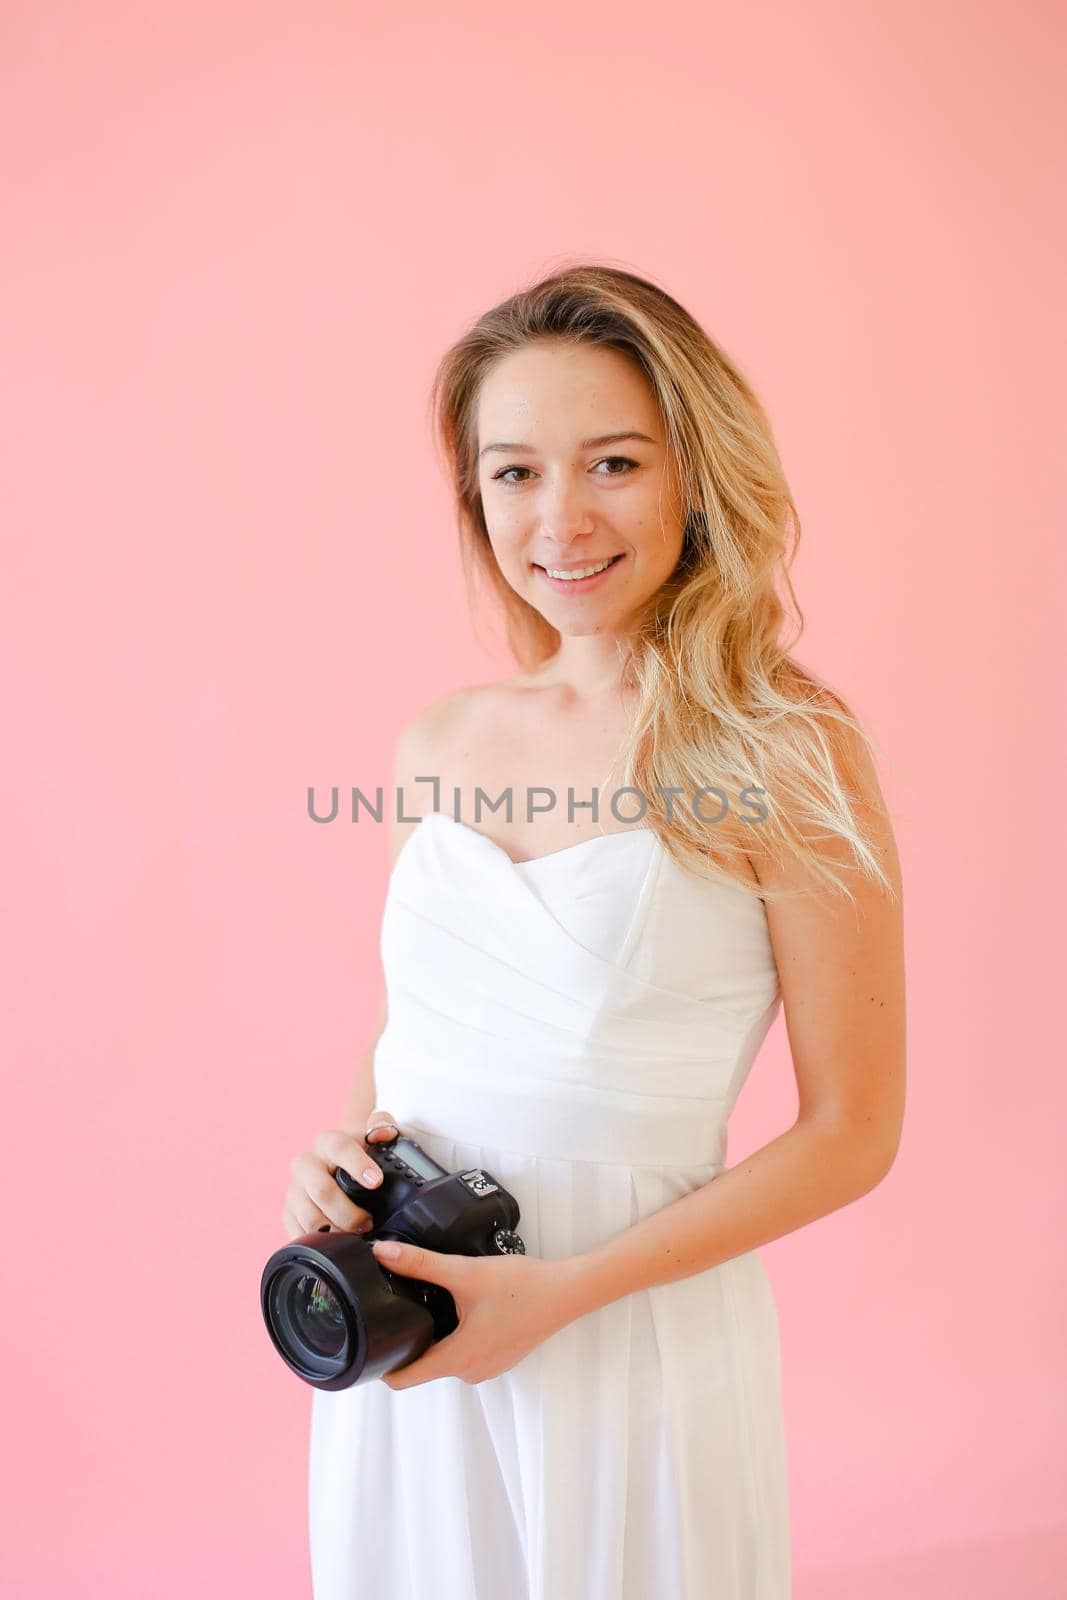 Young european smiling female photographer with camera in pink monophonic background. Concept of modern profession and photo session.